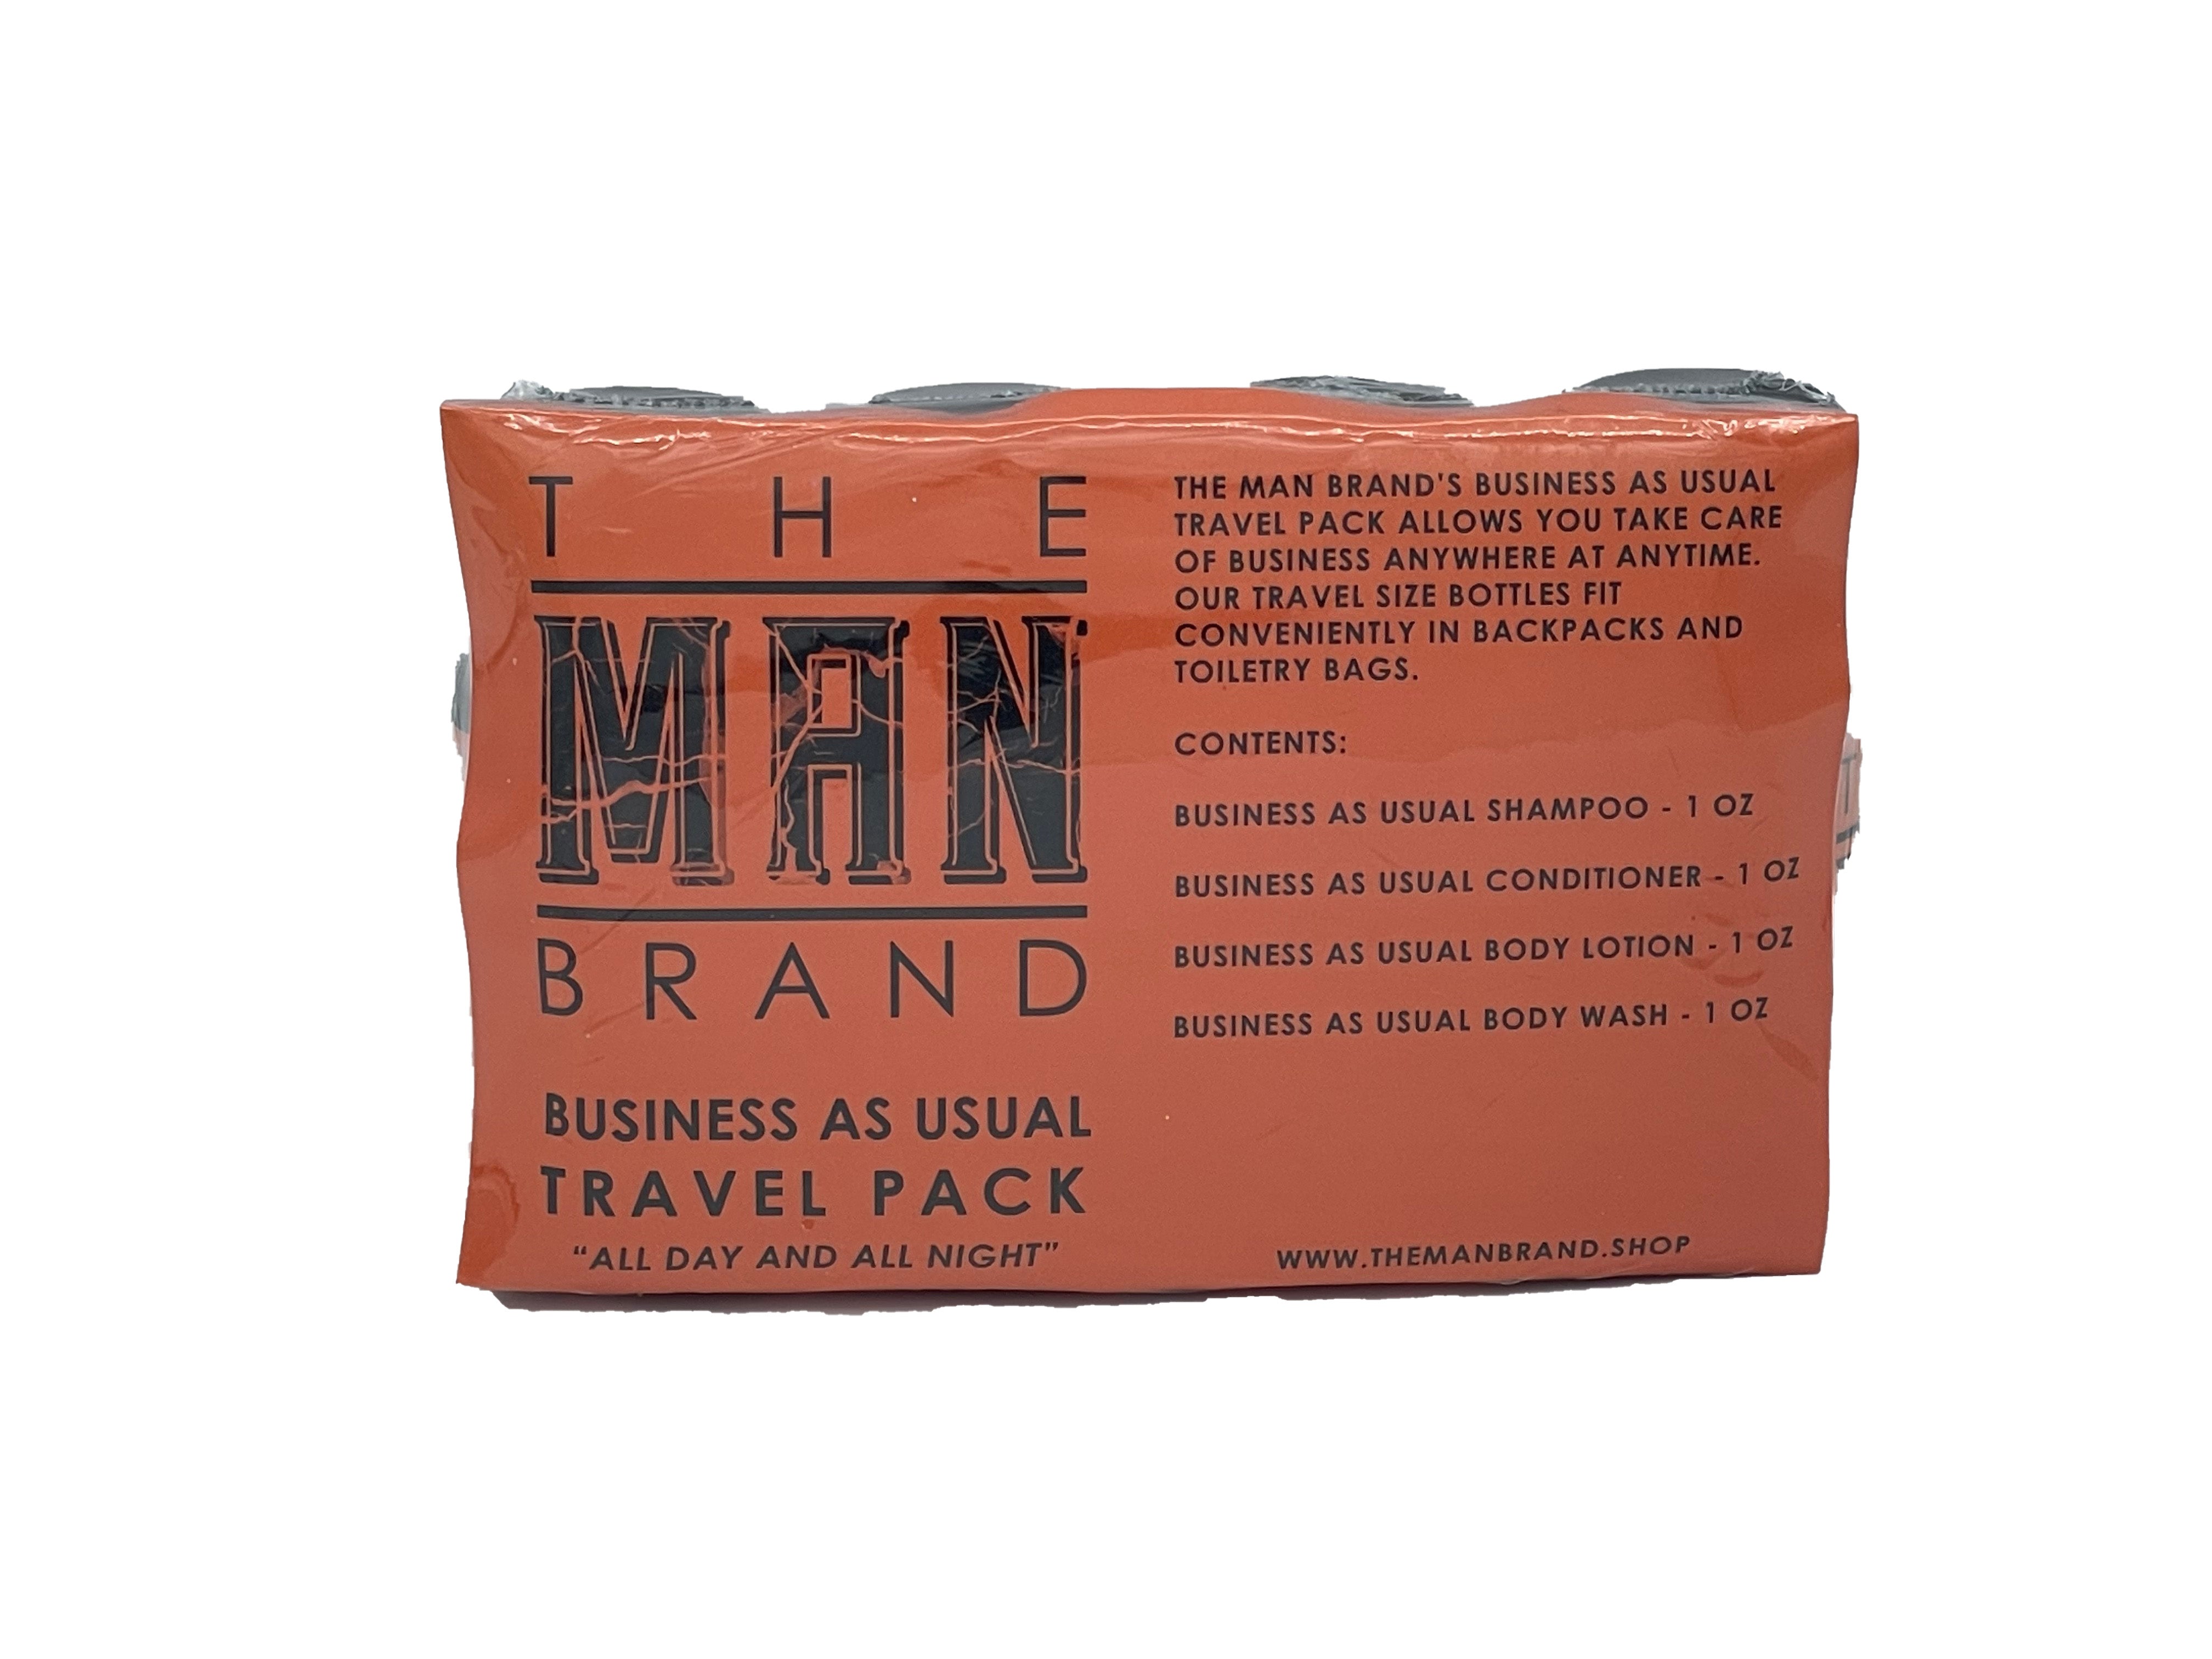 The Man Brand's Travel Pack for Men with Shampoo, Conditioner, Body Lotion, and Body Wash in 1 oz travel size bottles